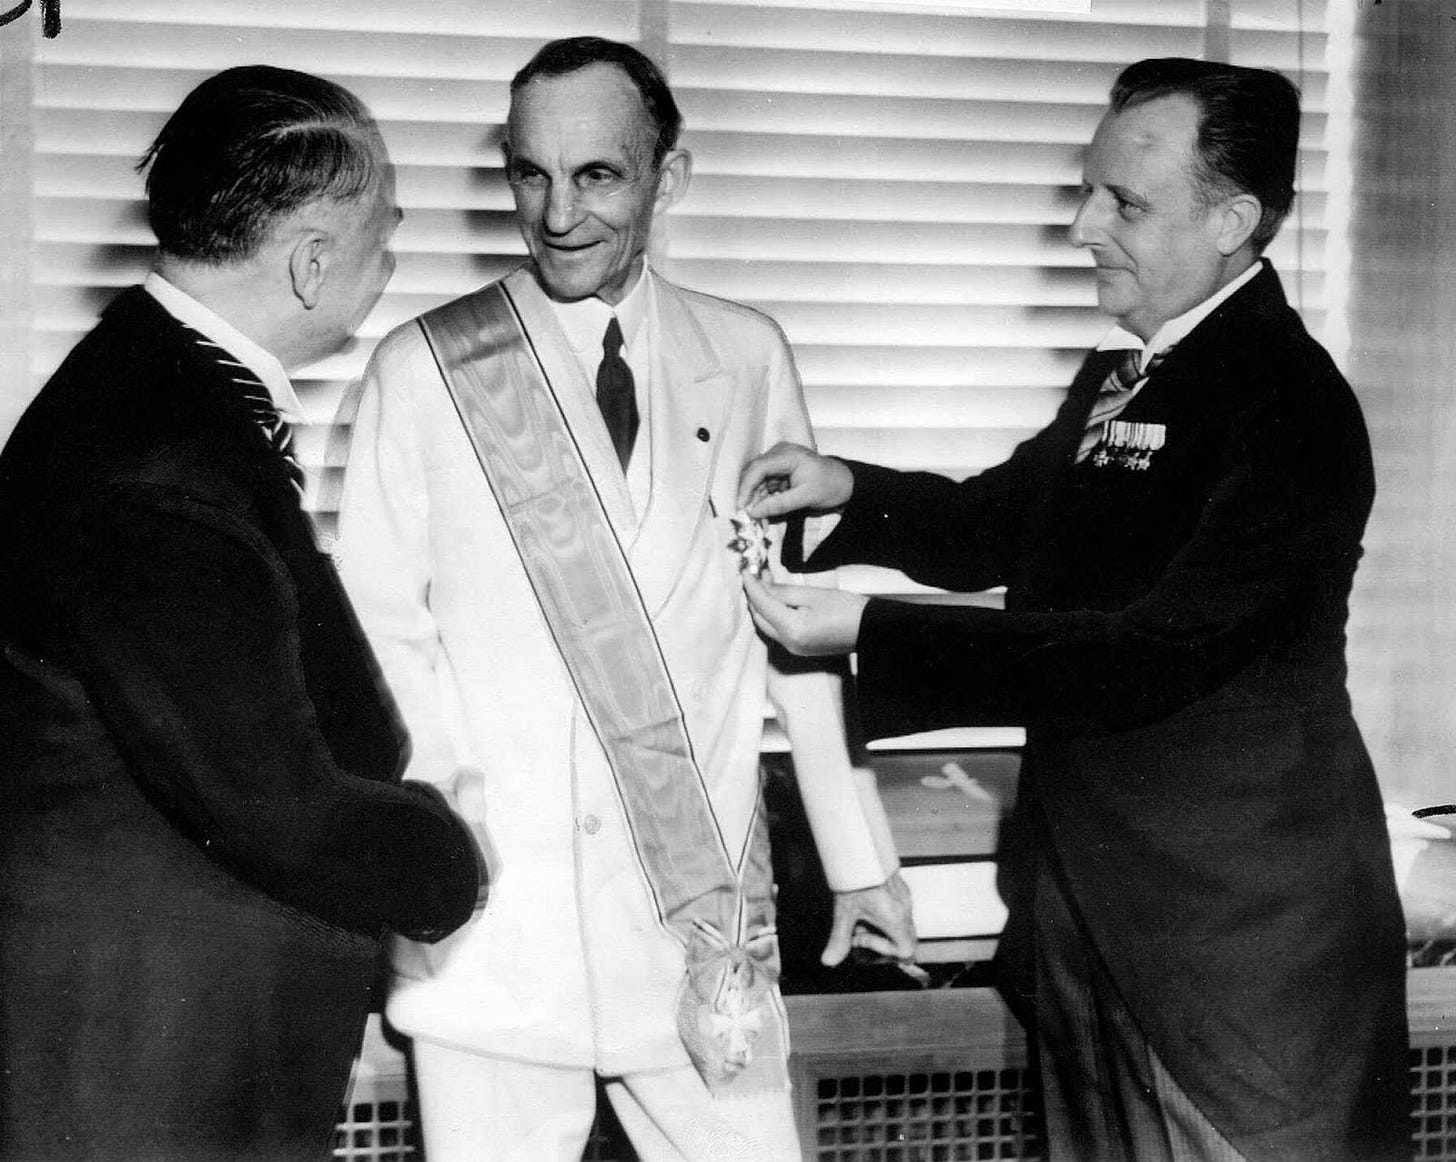 Henry Ford receiving the Grand Cross of the German Eagle from Nazi  officials, 1938 - Rare Historical Photos